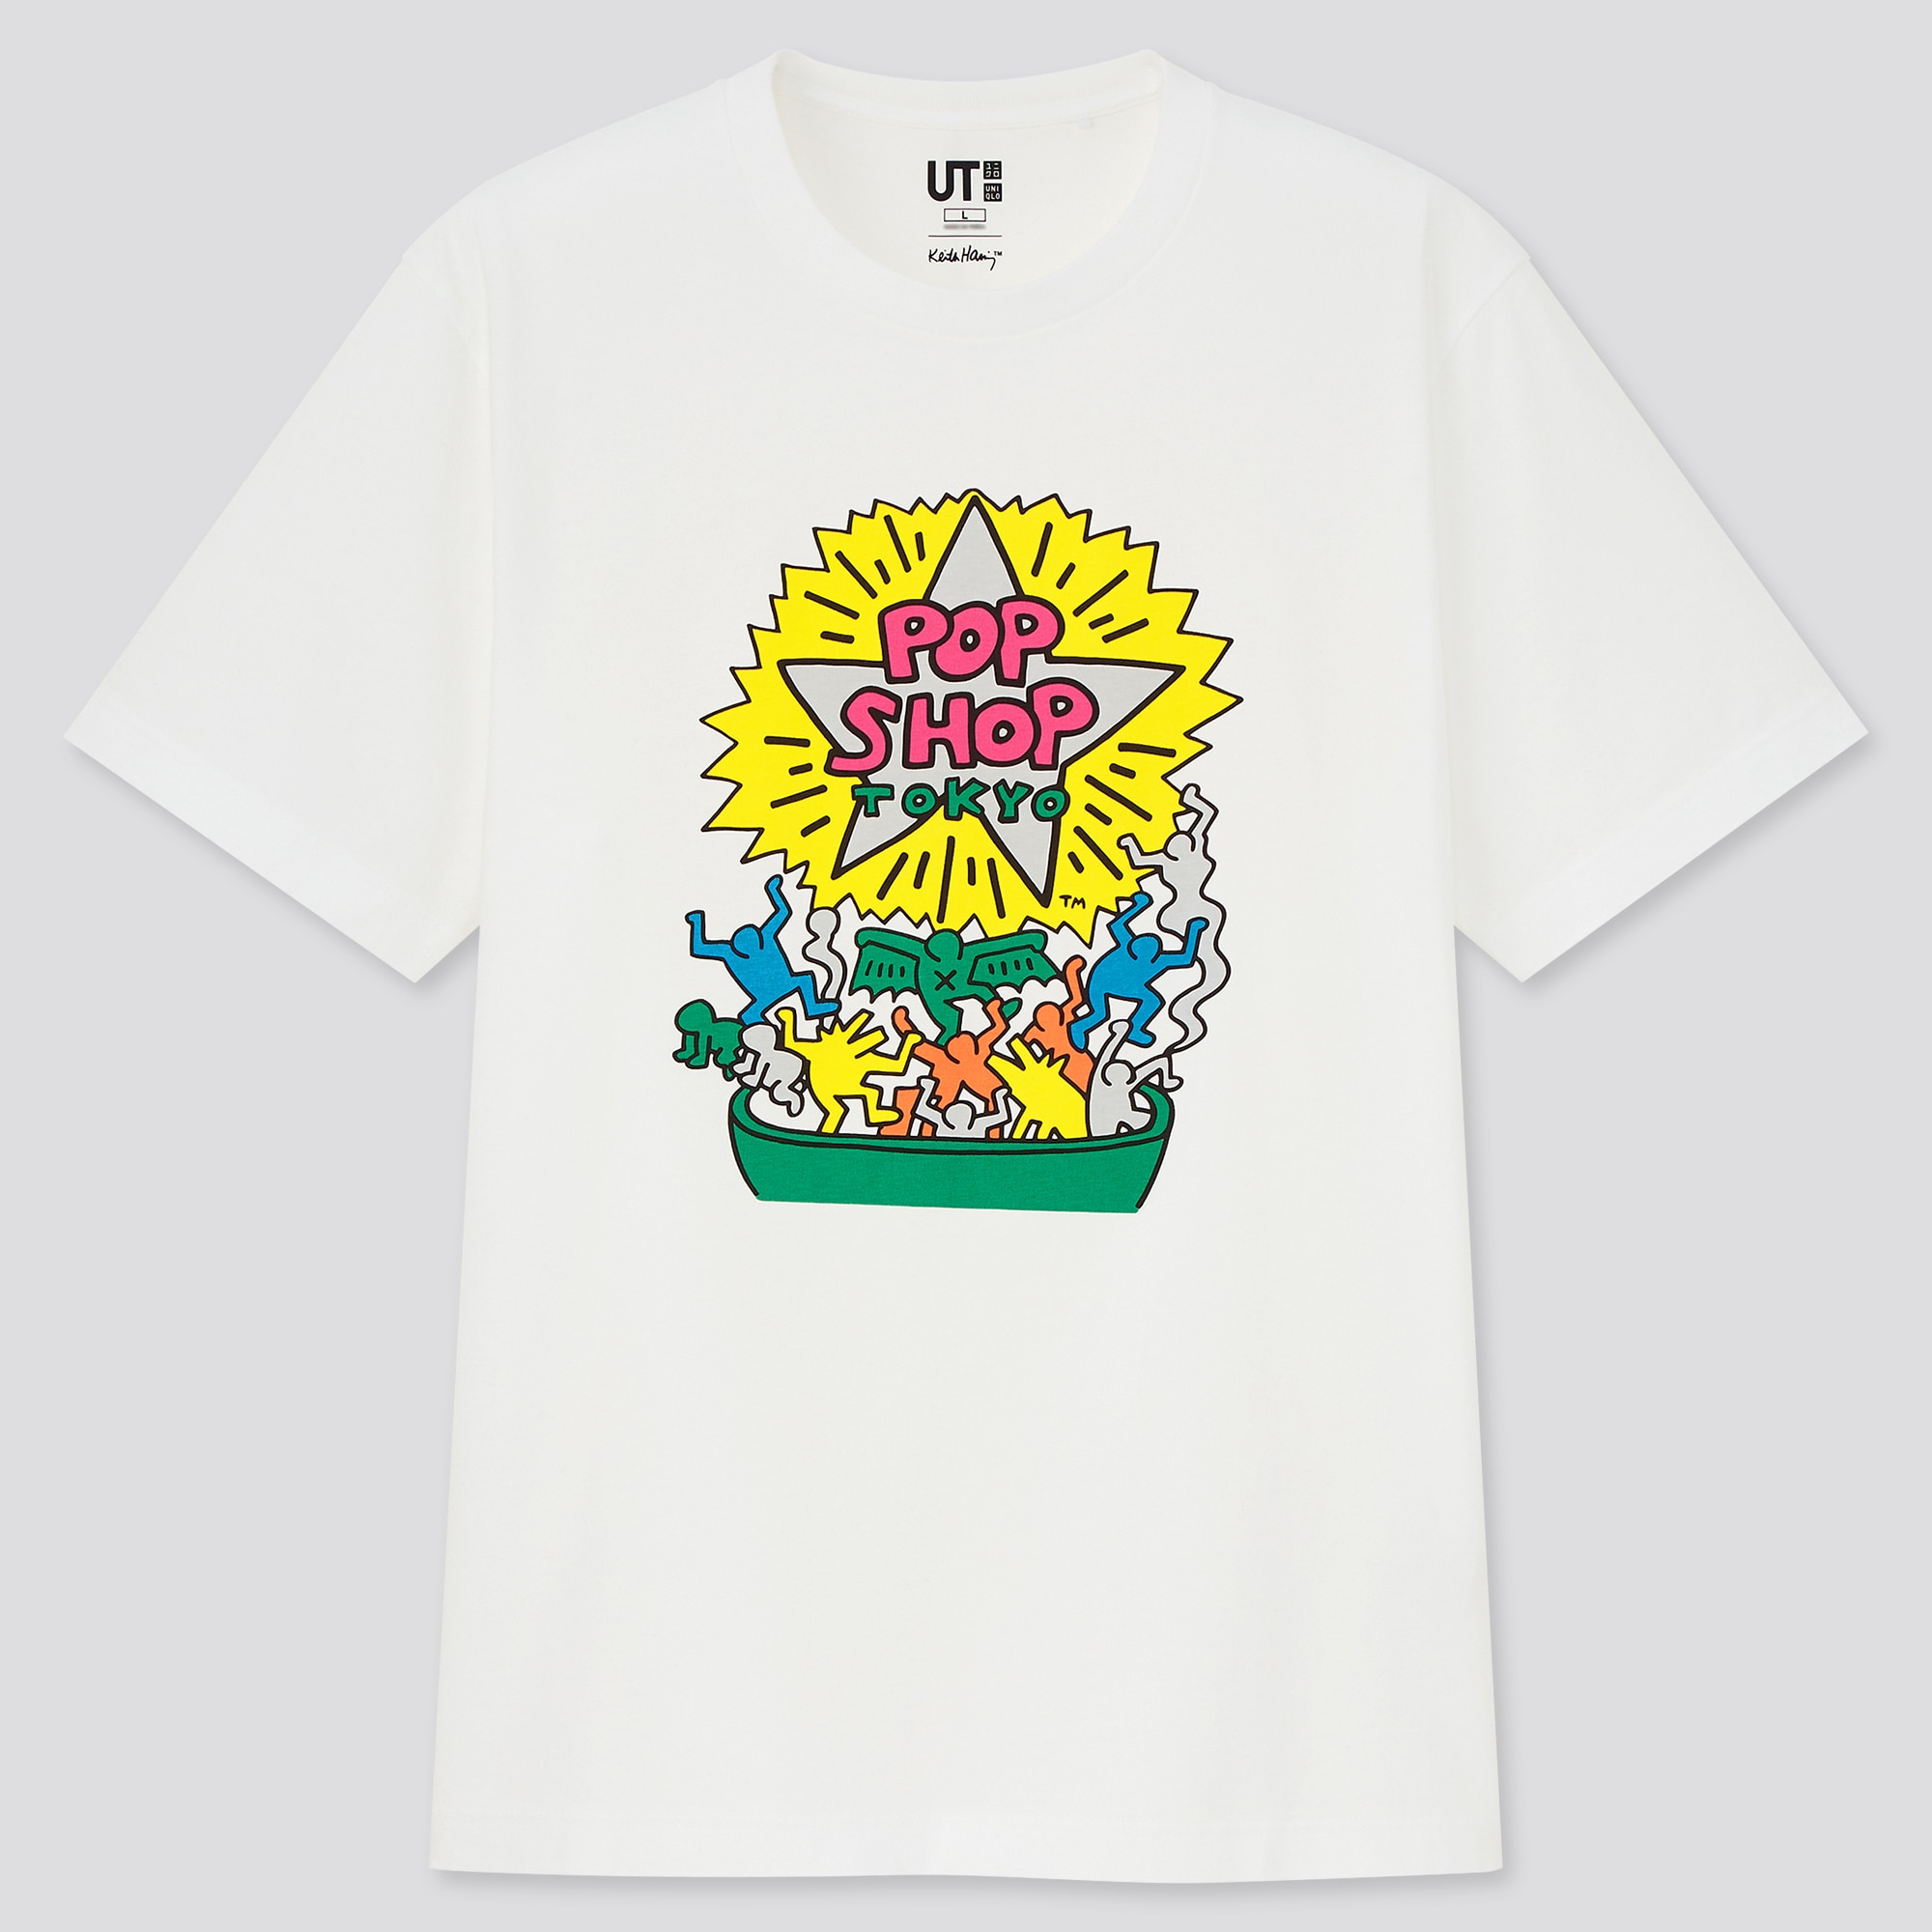 UNIQLOs new collection is inspired by the legendary artist Keith Haring